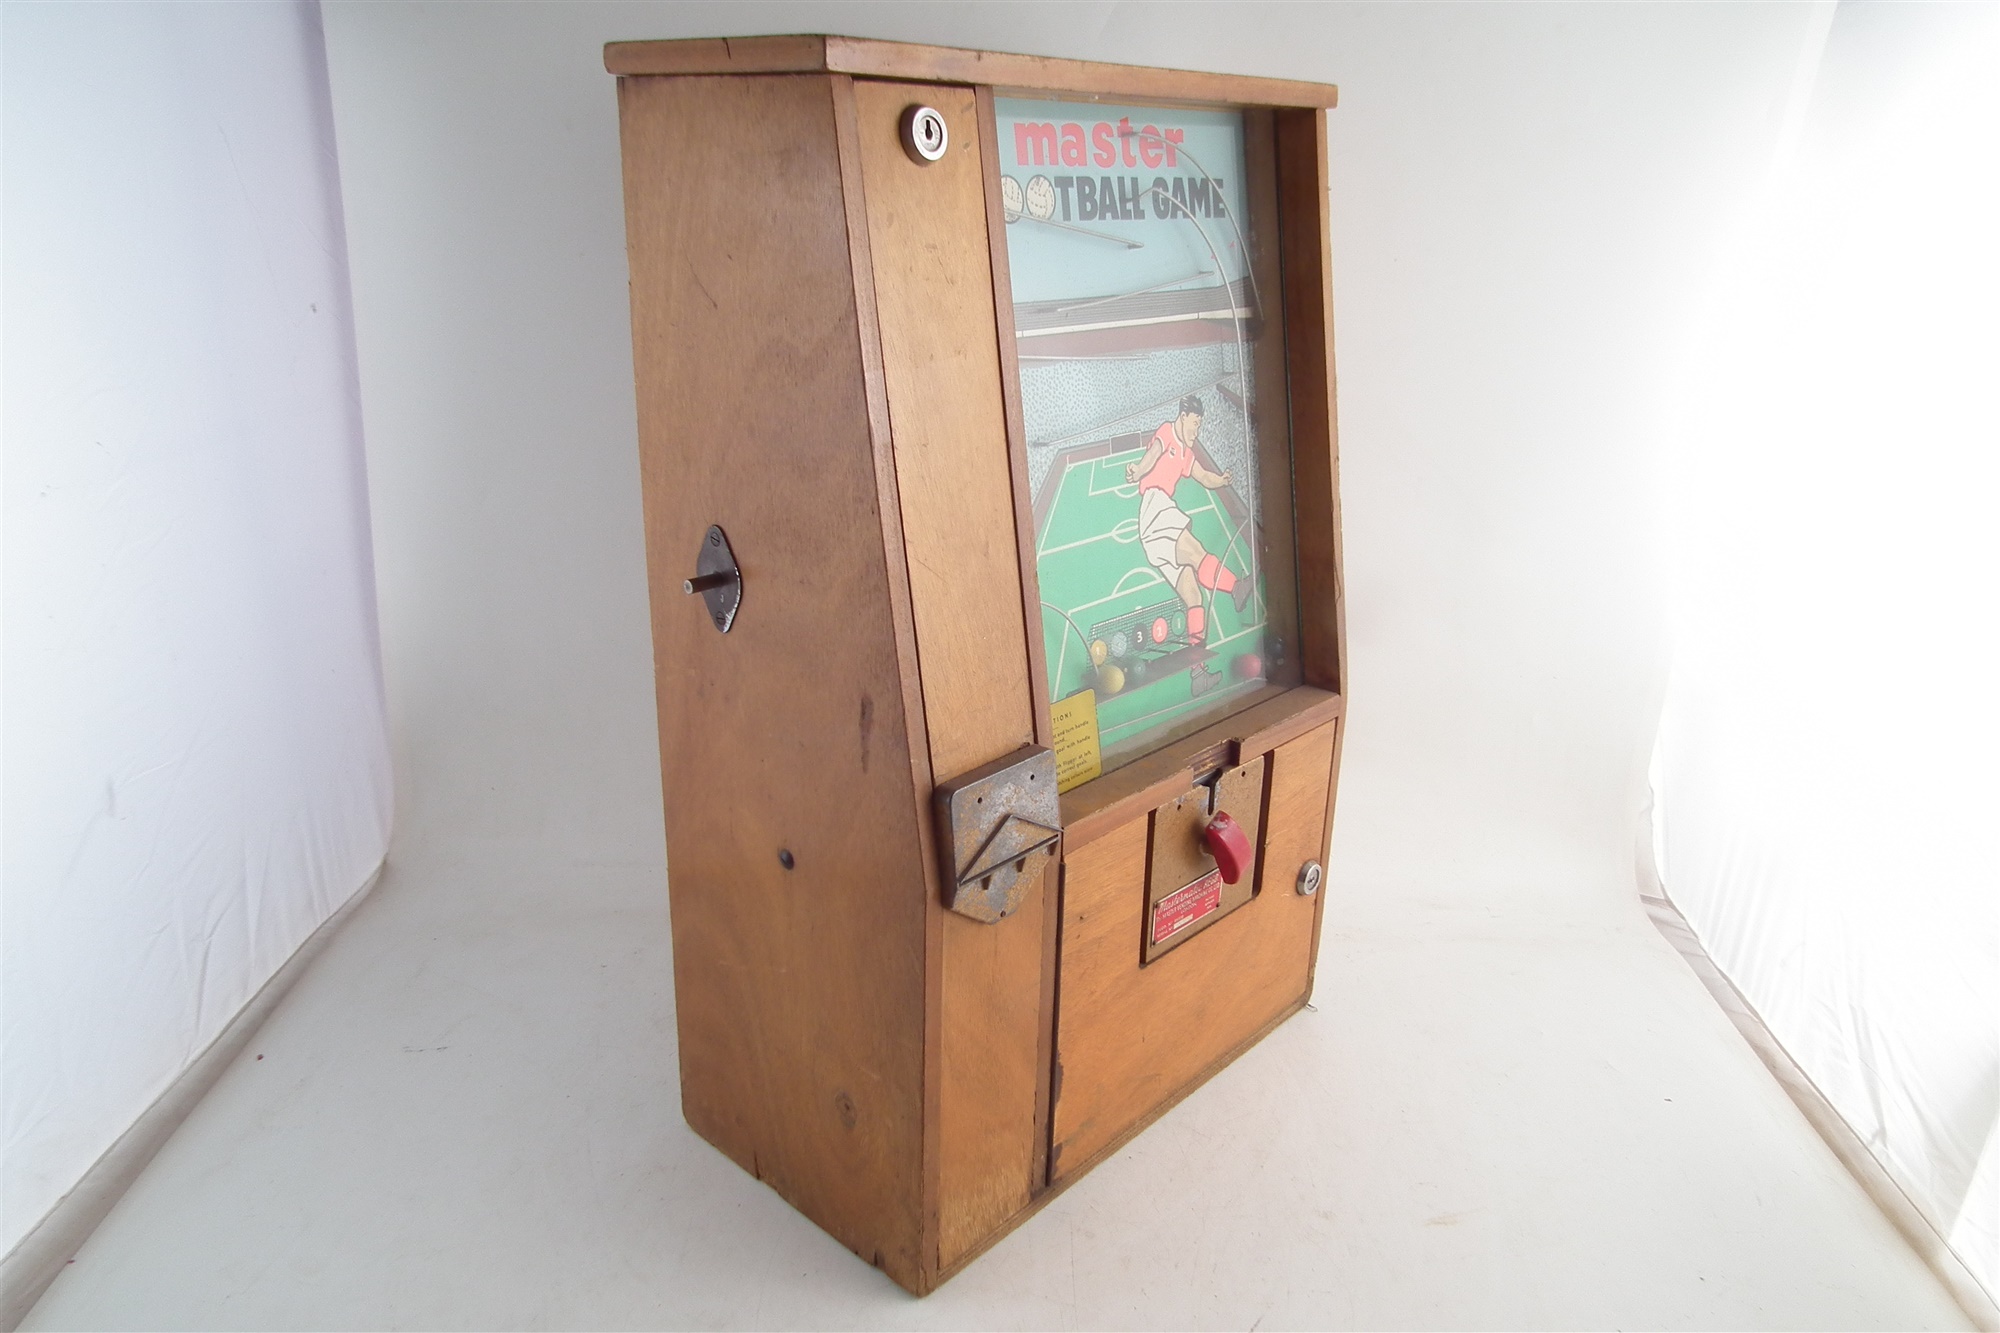 Mastermatic 'Master Football Game' penny slot machine, with five coloured balls, no keys, 66cm - Image 2 of 7